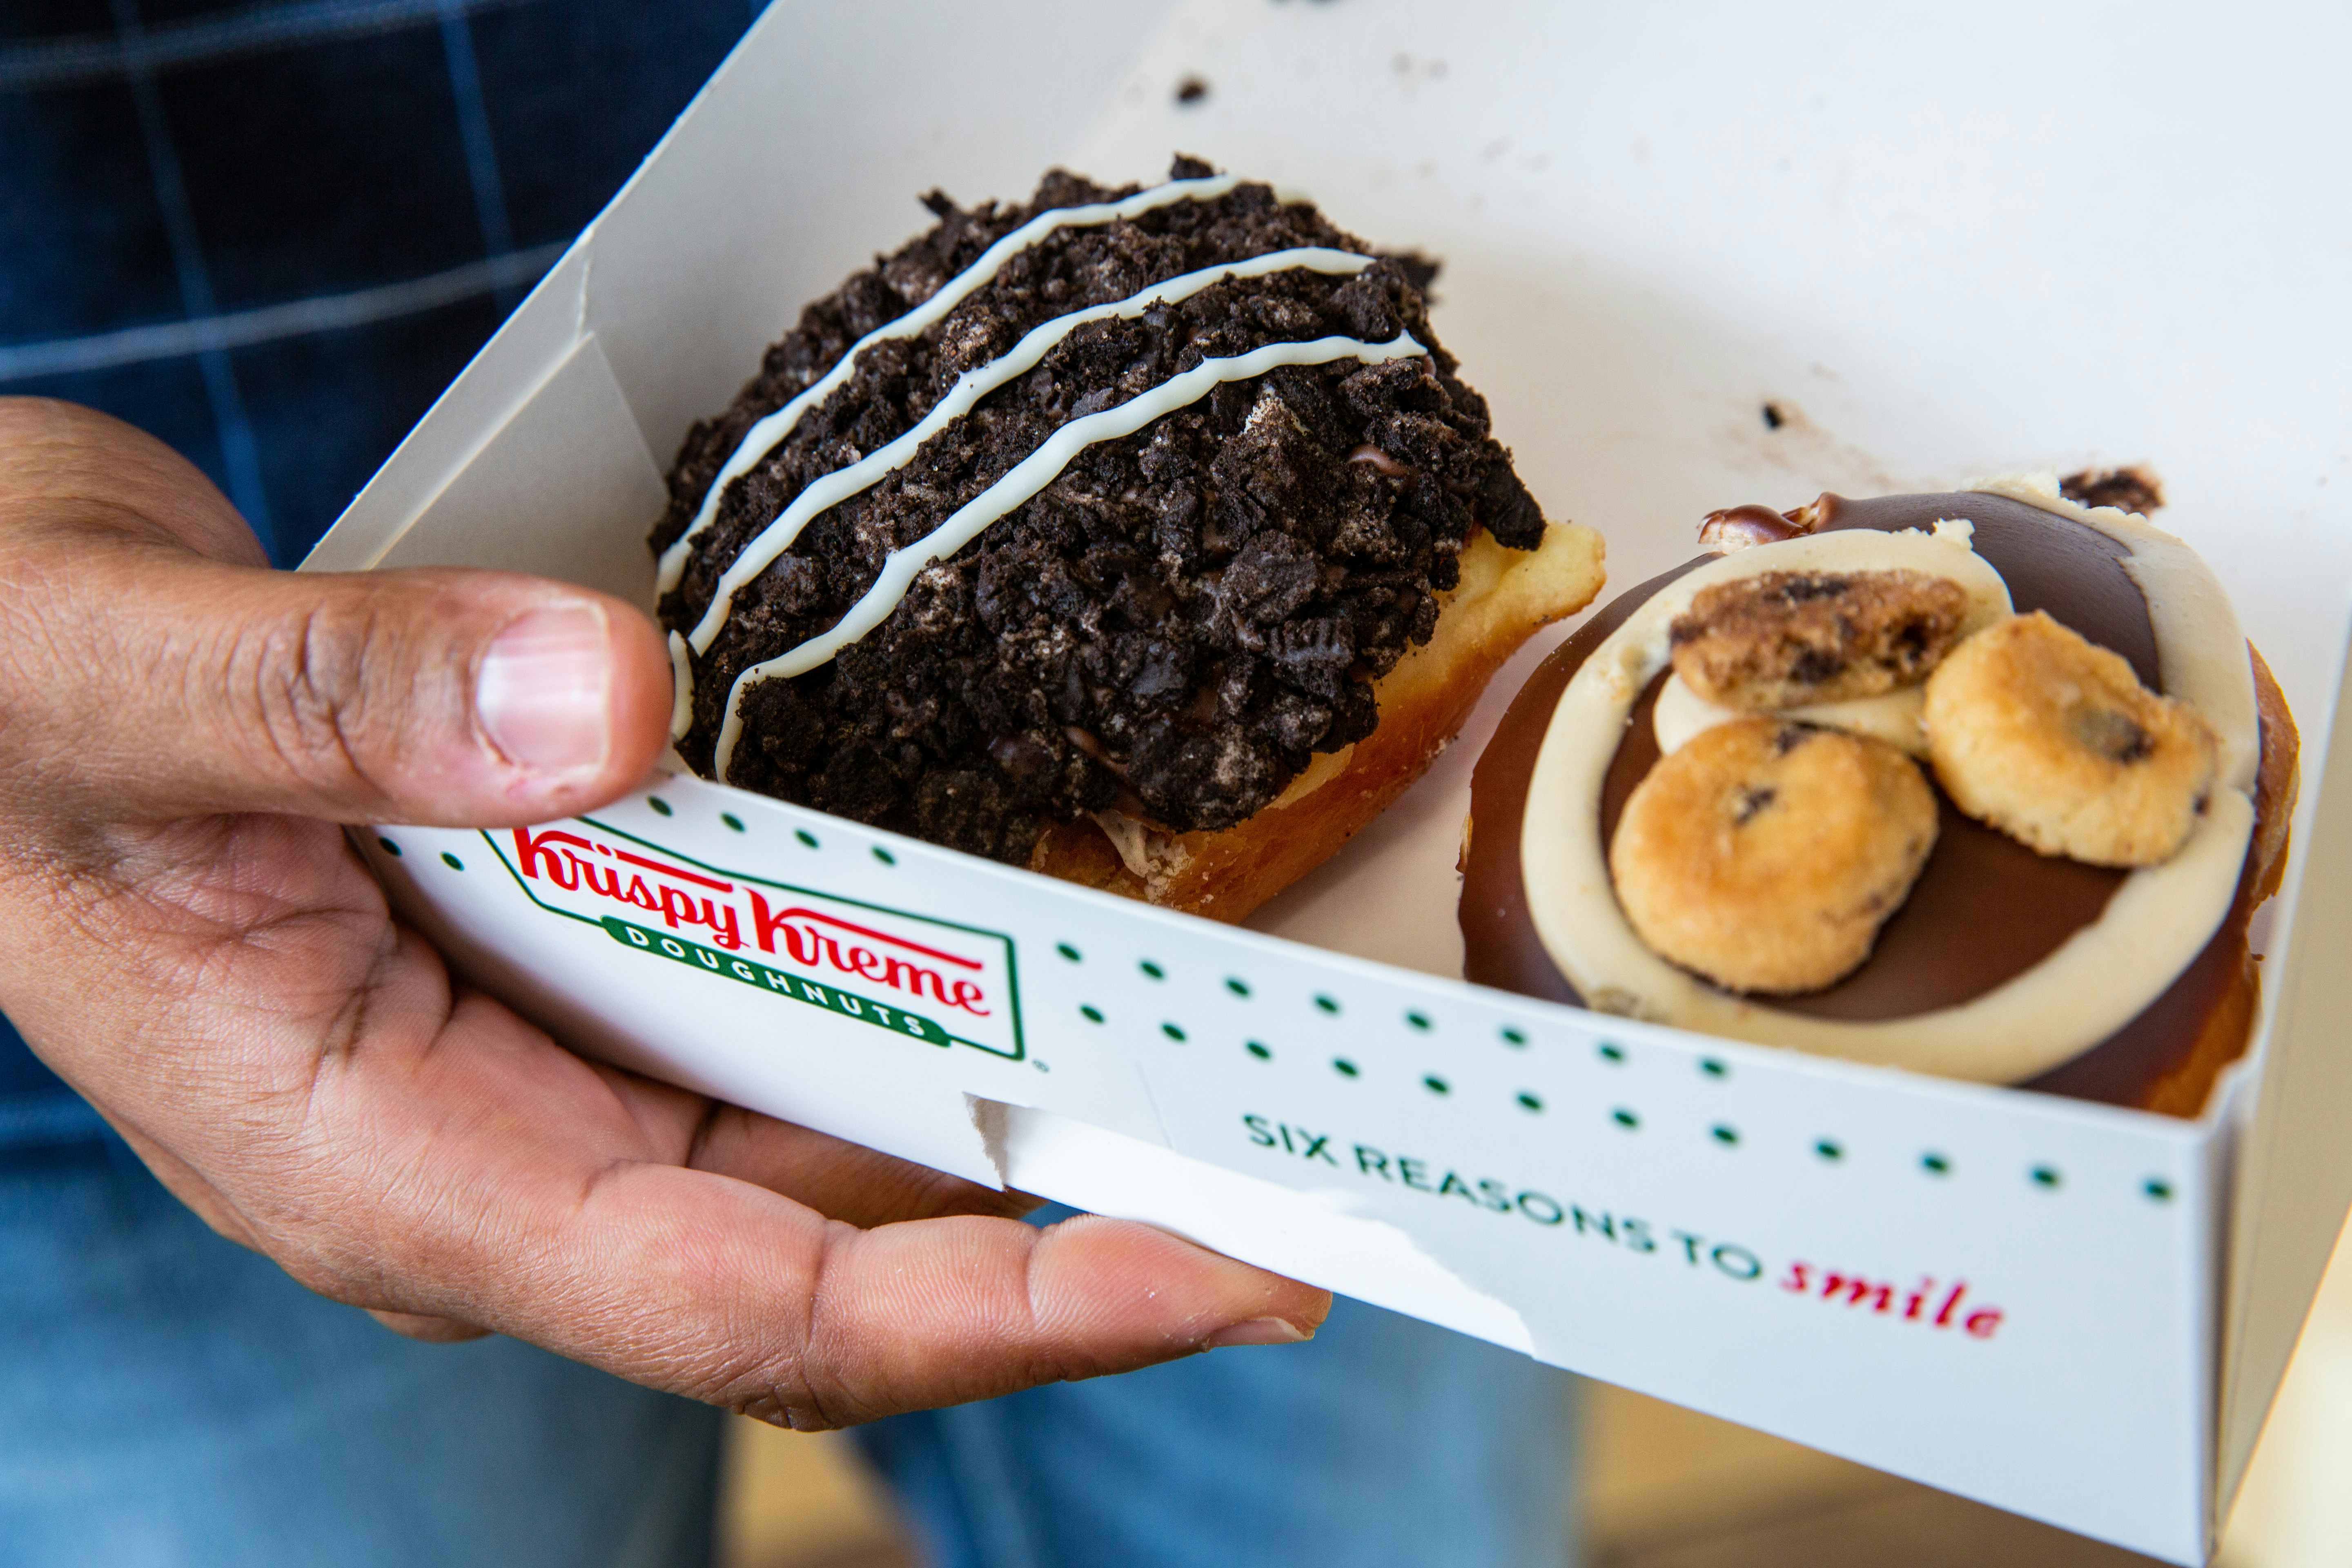 Hand holding a box of donuts from krispy kreme.